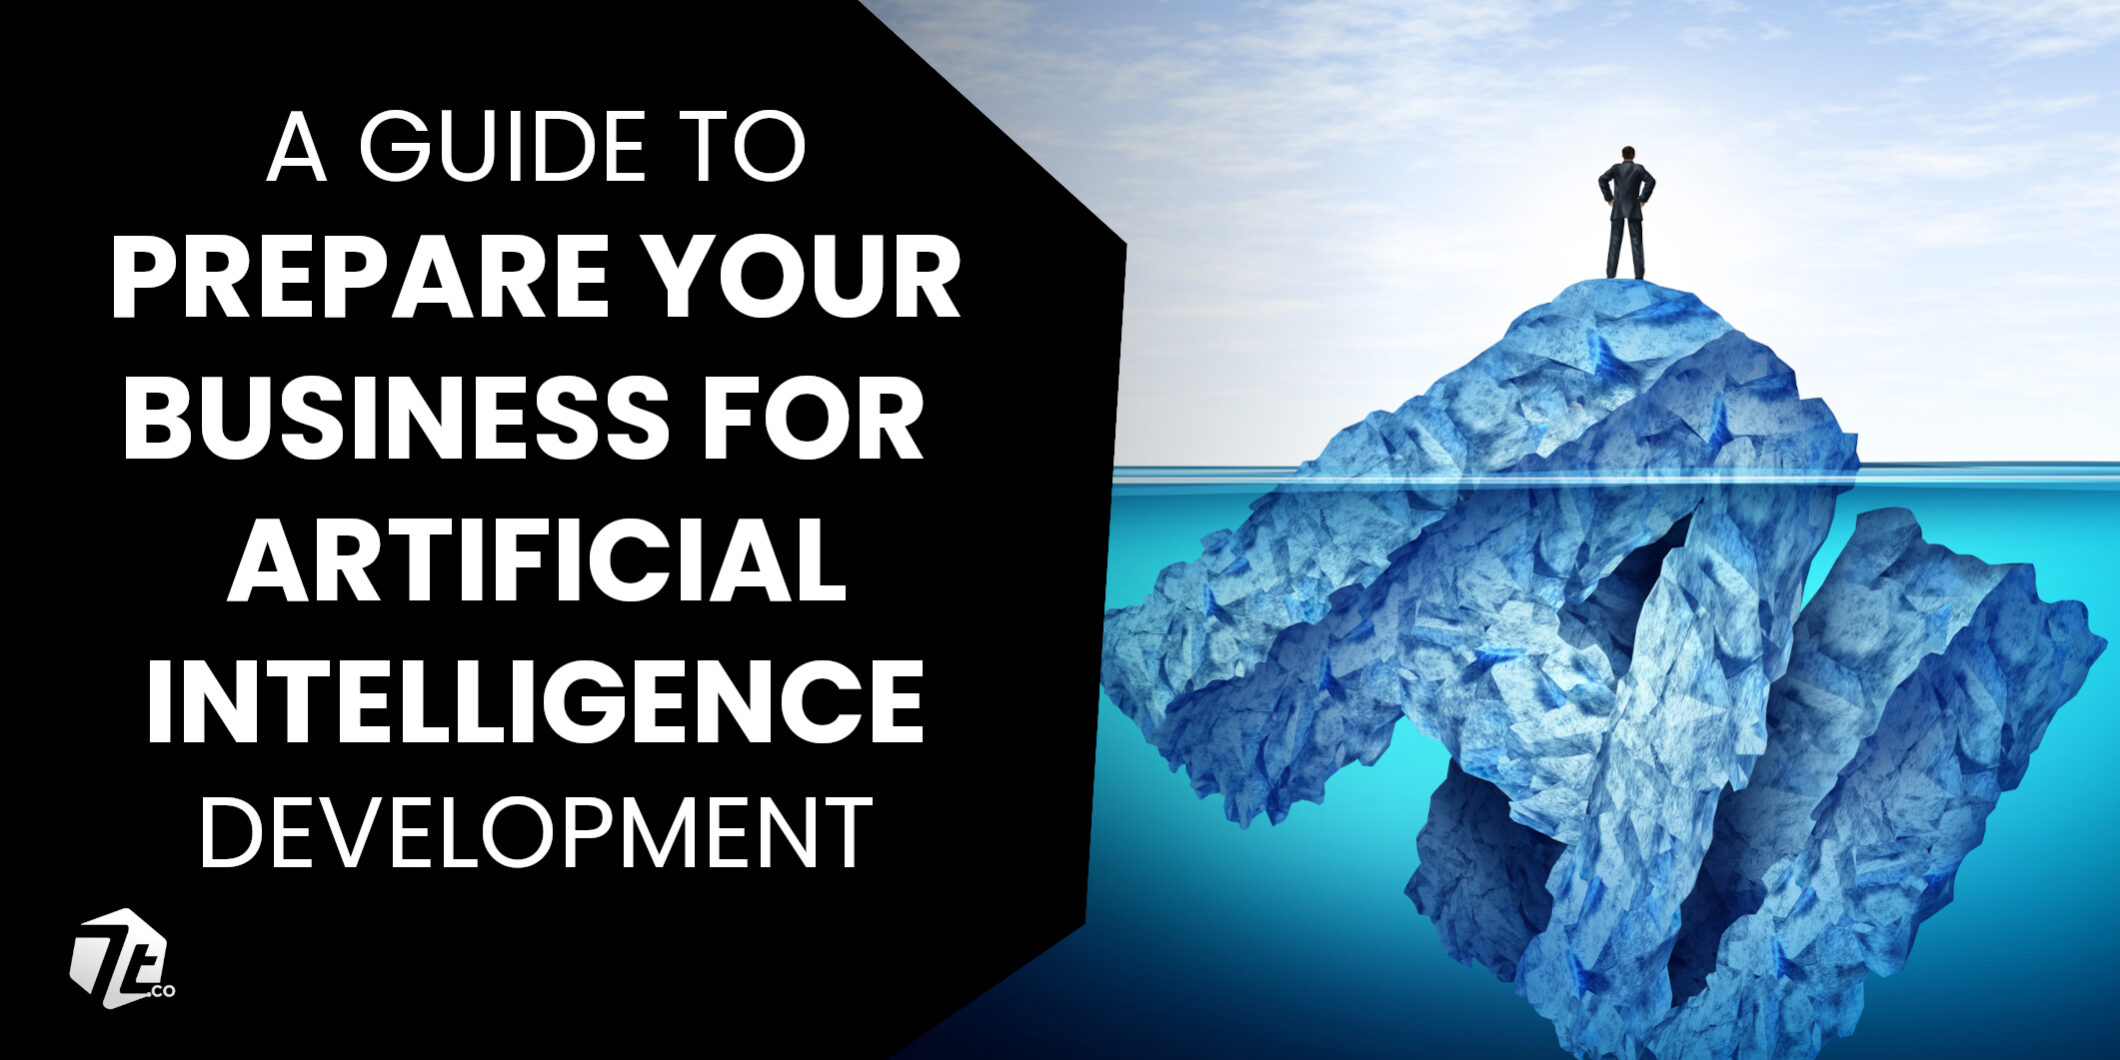 A Guide to Prepare Your Business for Artificial Intelligence (AI) Development